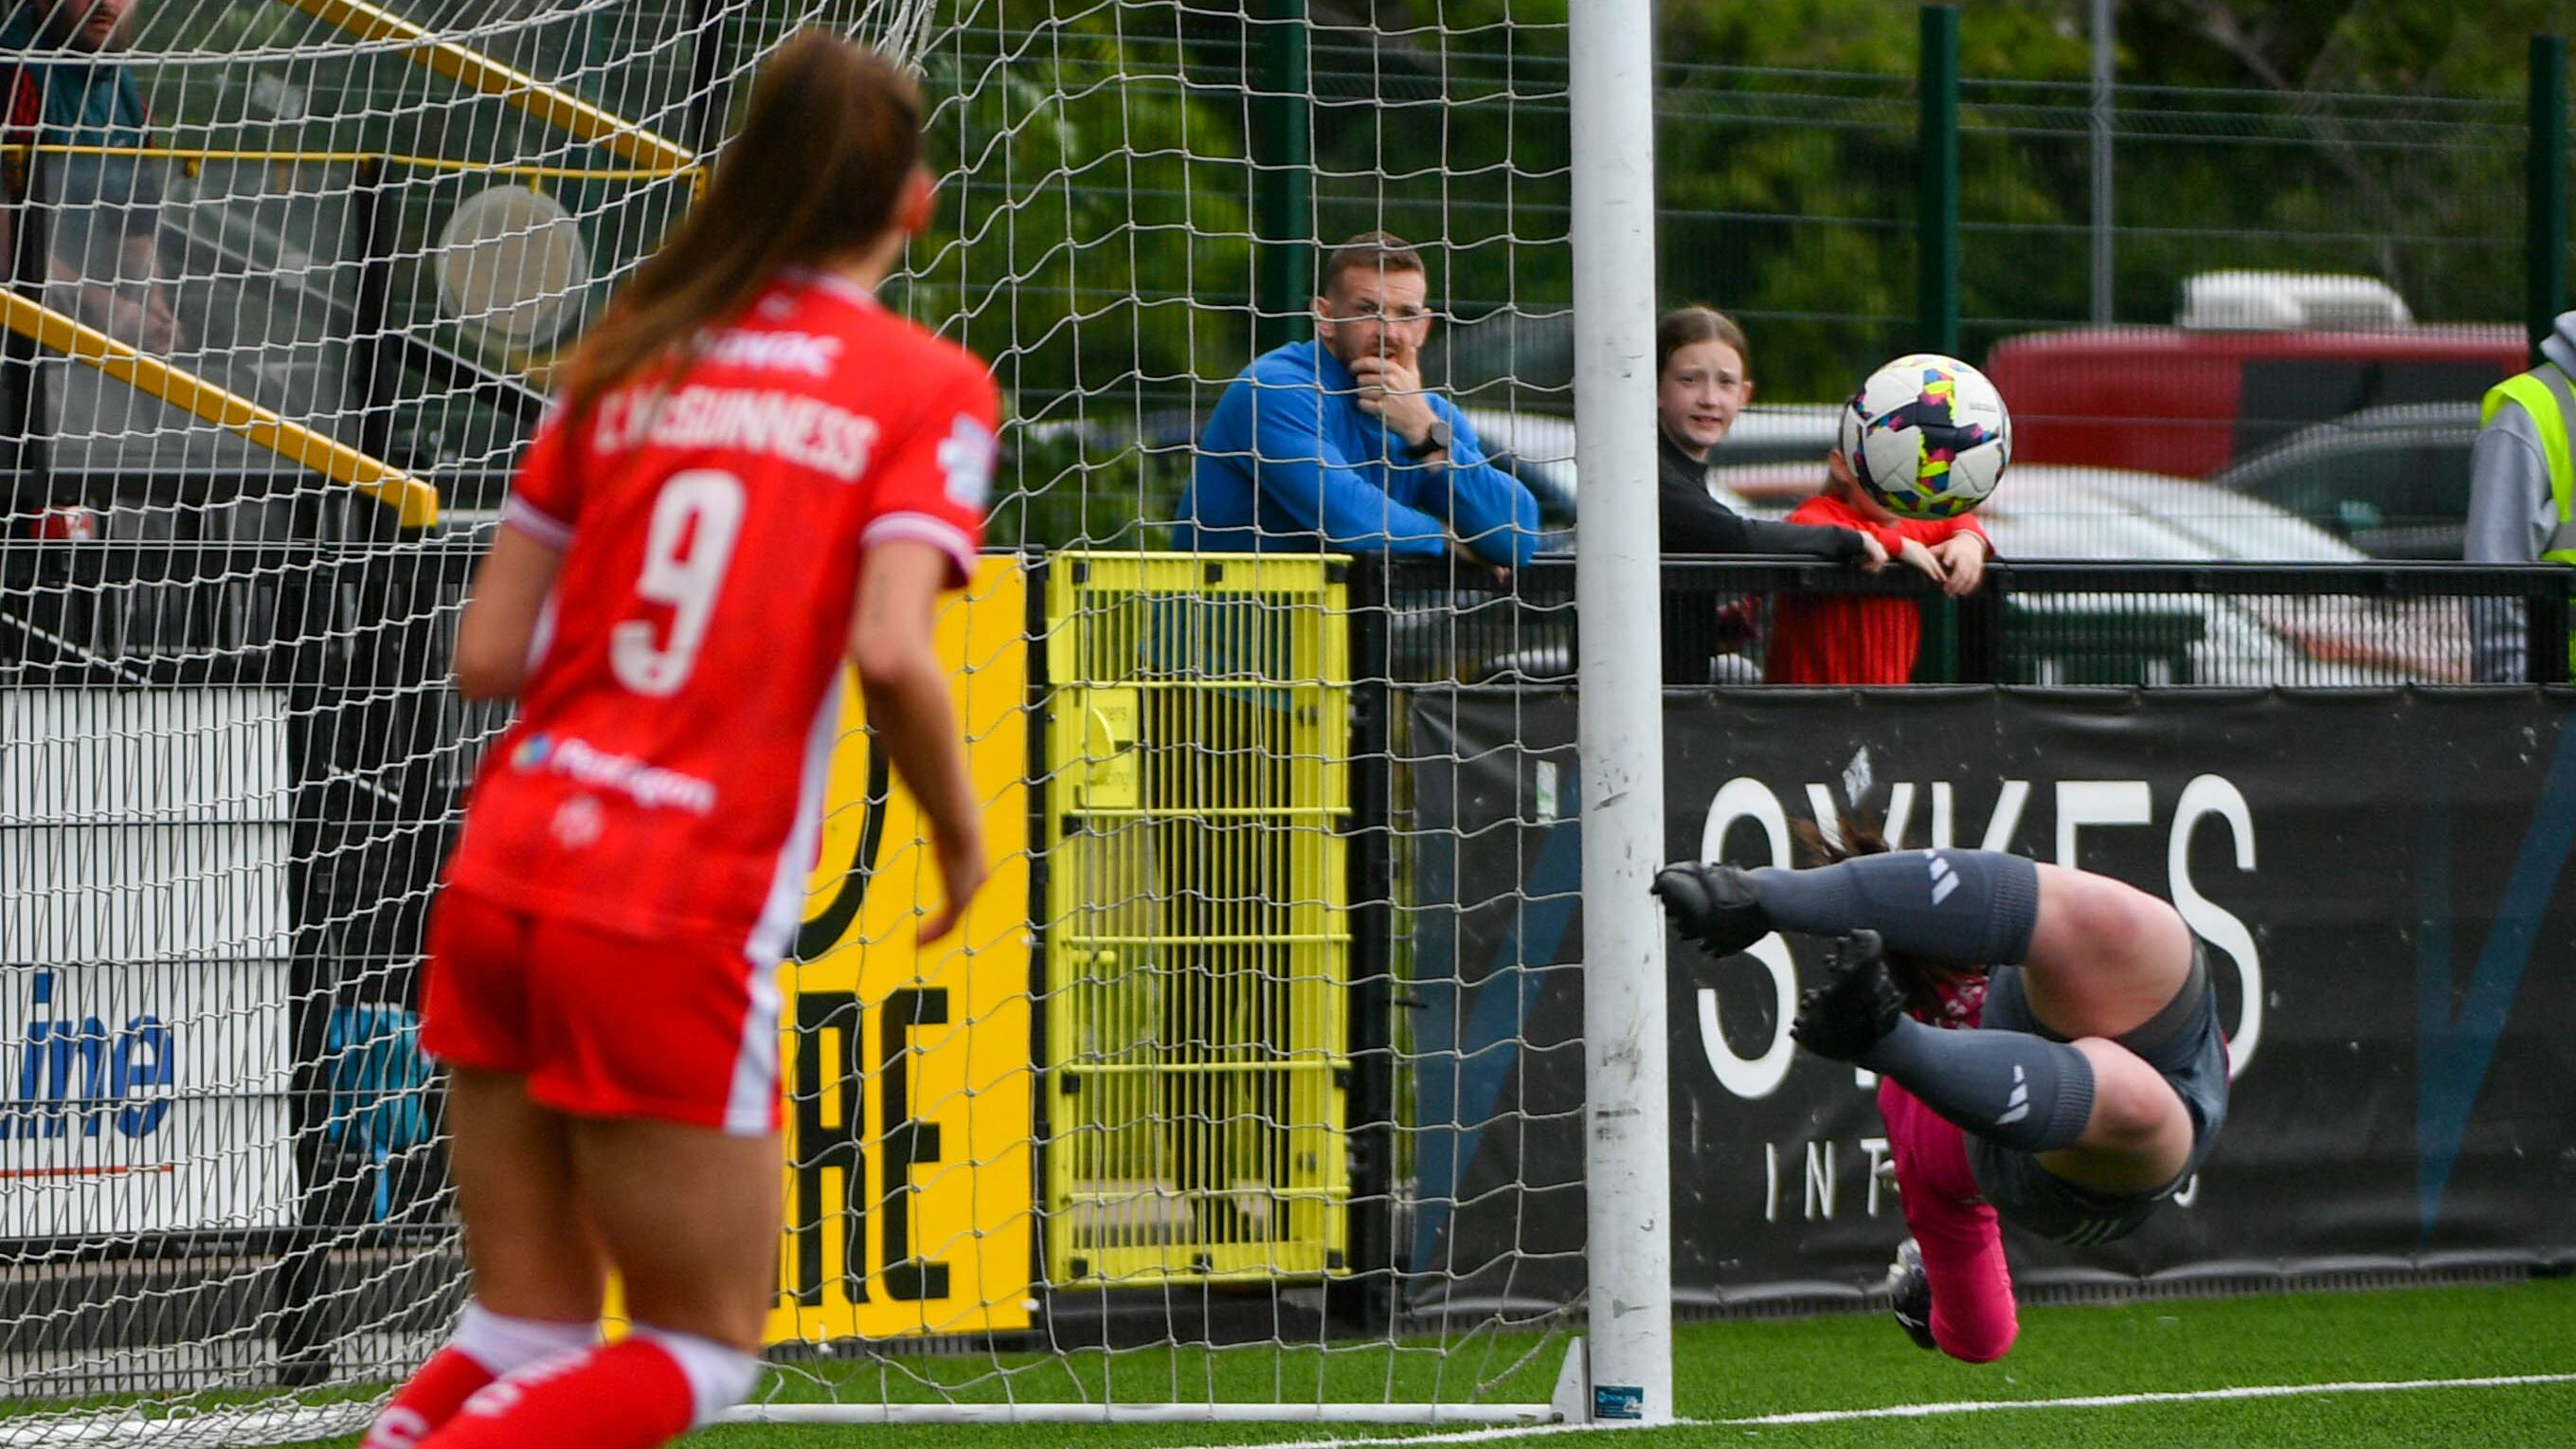 PACEMAKER PRESS BELFAST 30-06-24
VBET Women’s League Cup Final 2024
Cliftonville v Lisburn Rangers
Toni-Lee Finnegan of Cliftonville has a shot saved by Emma Higgins of Lisburn Rangers during this afternoon’s game at Blanchflower Stadium, Belfast.
 Photo - Andrew McCarroll/ Pacemaker Press